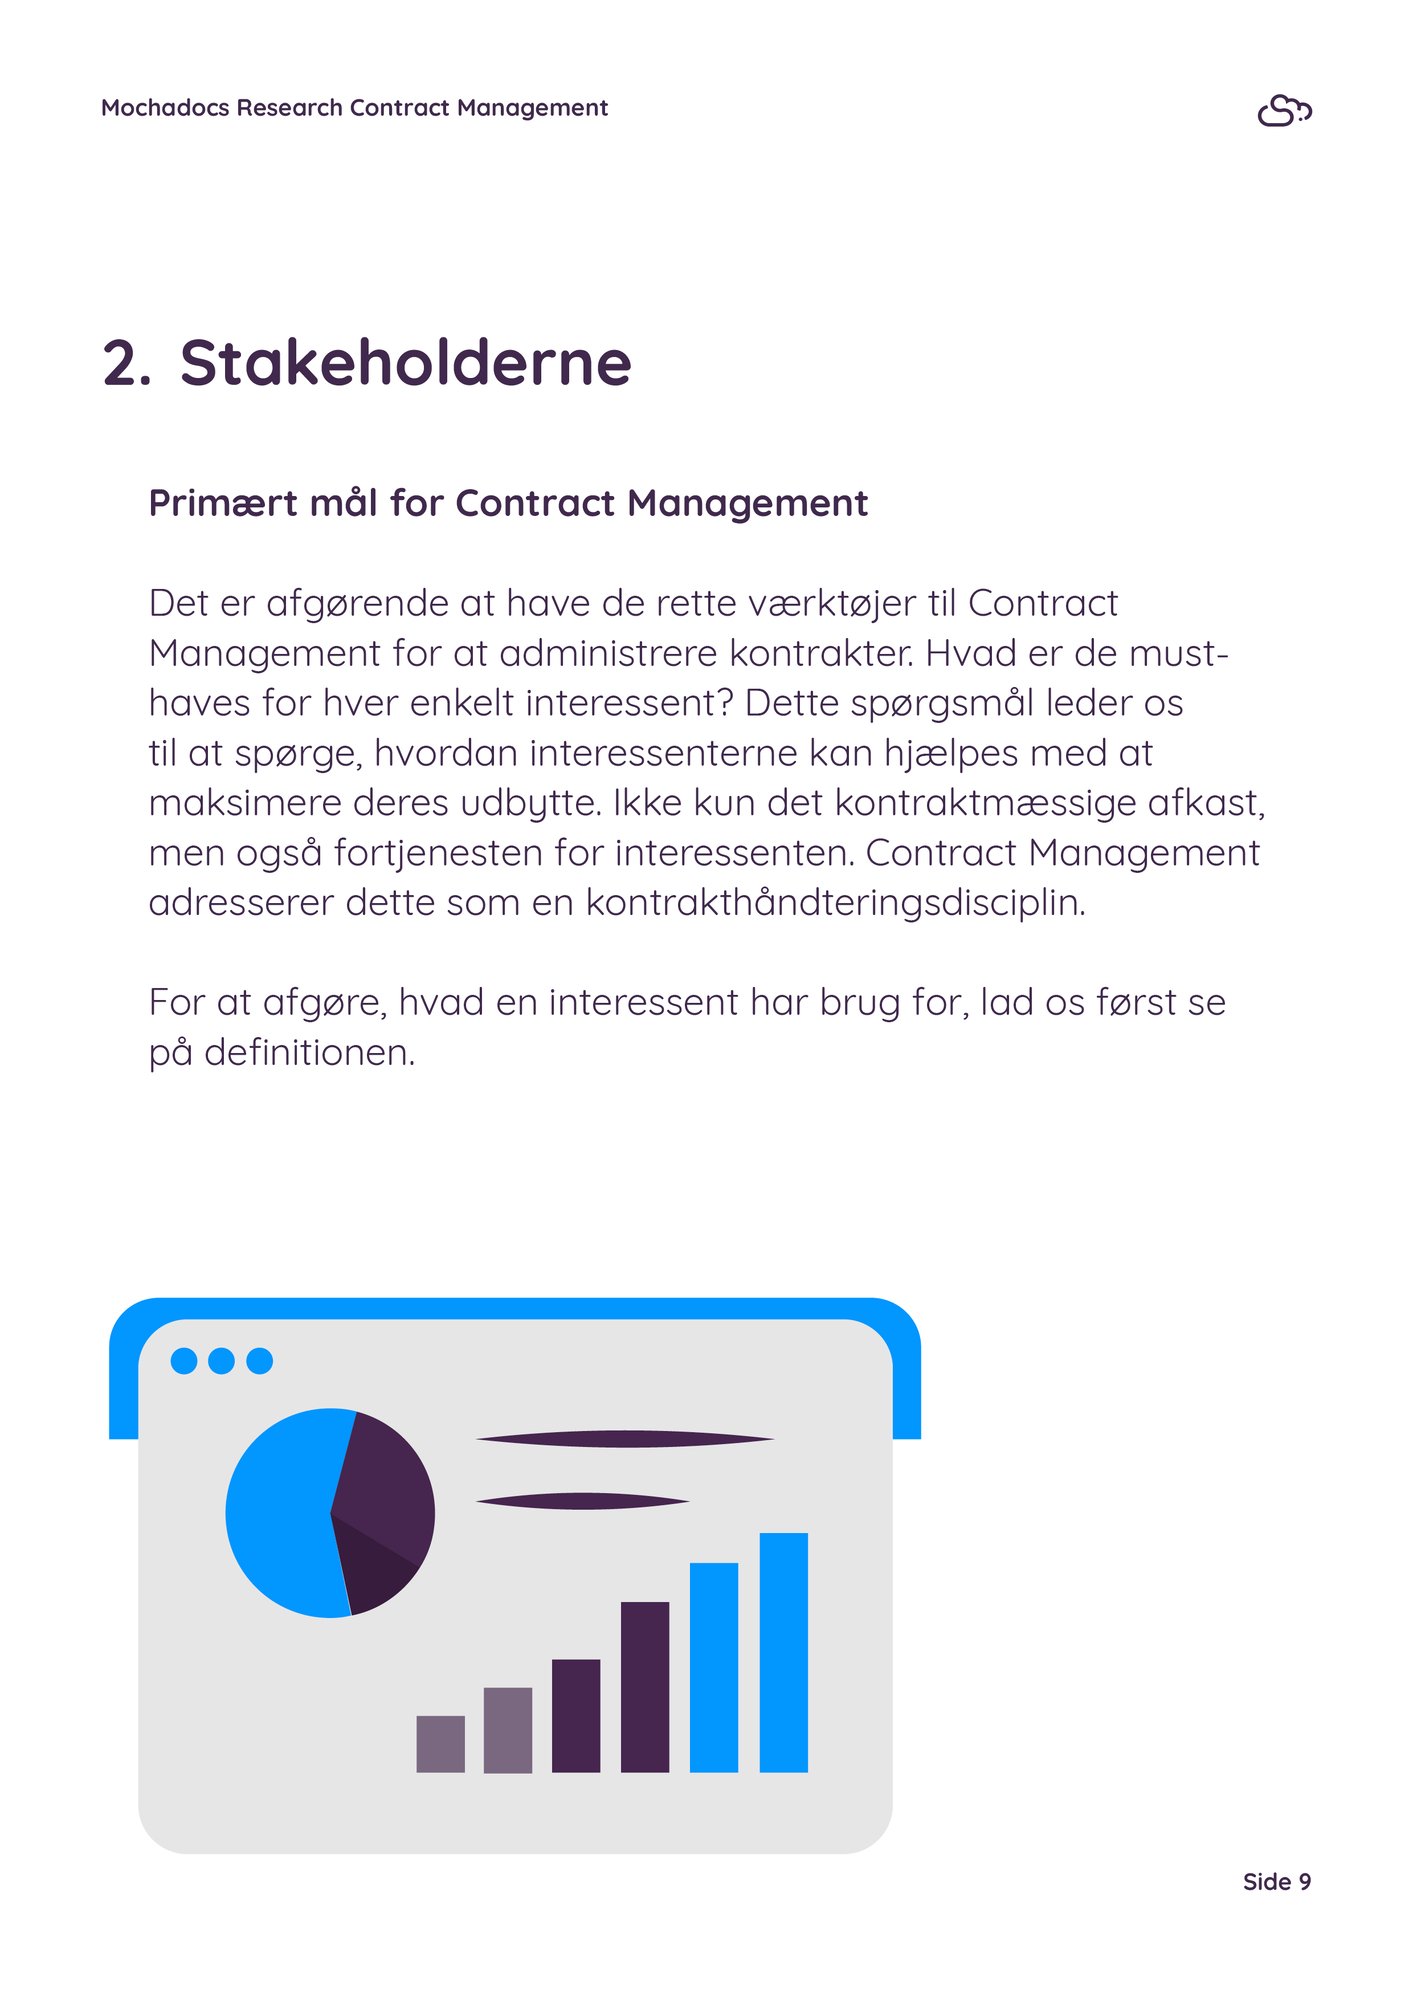 DE - The Contract Management Stakeholder9